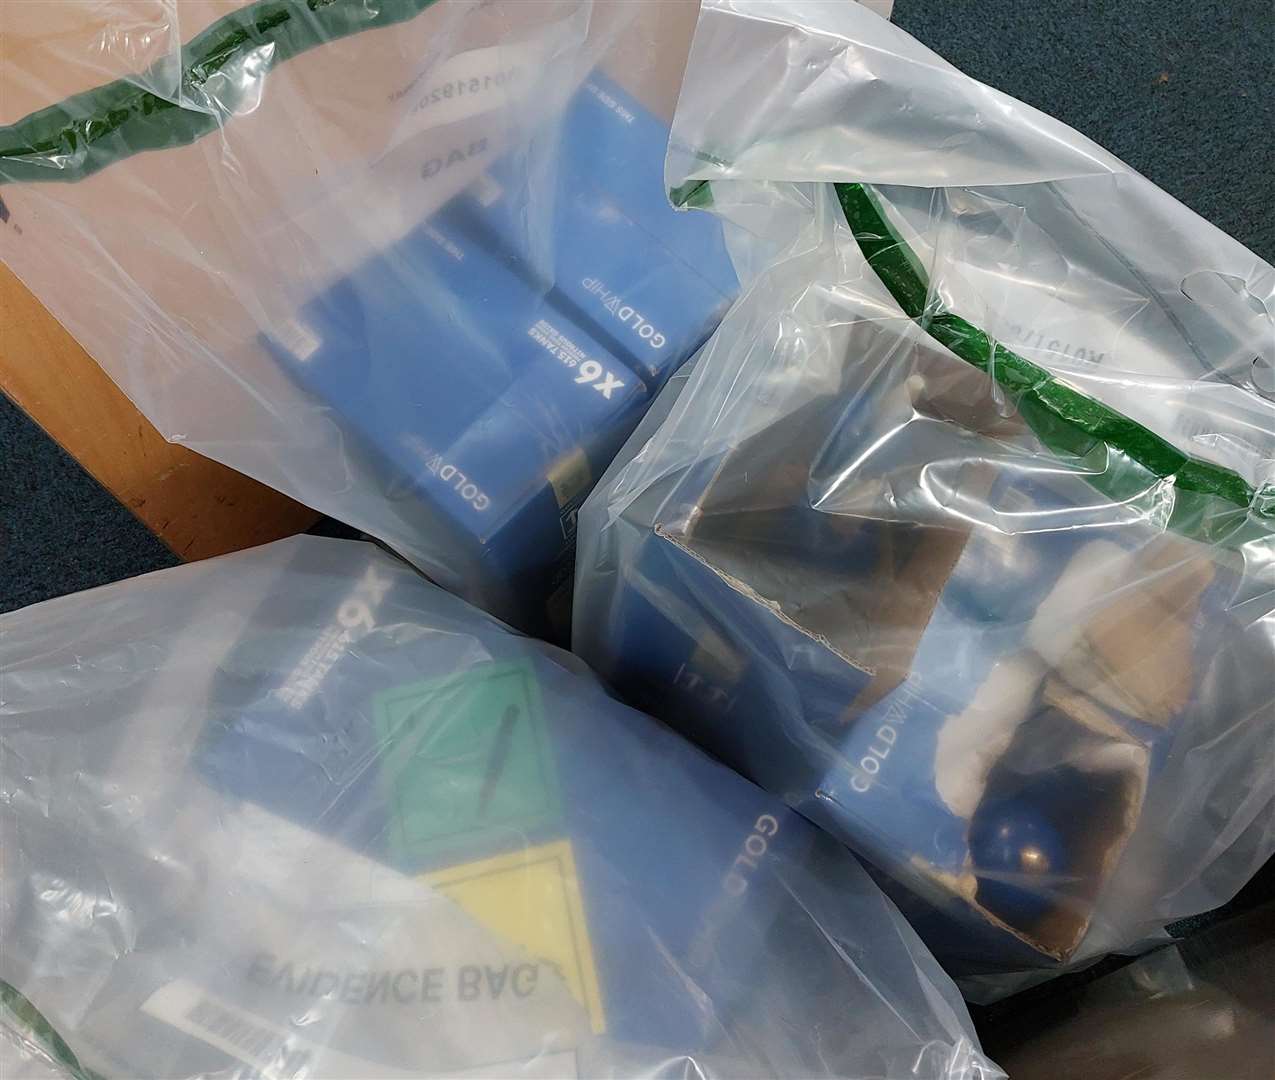 Nitrous oxide is set to be banned by the government. Picture: Kent Police Sevenoaks